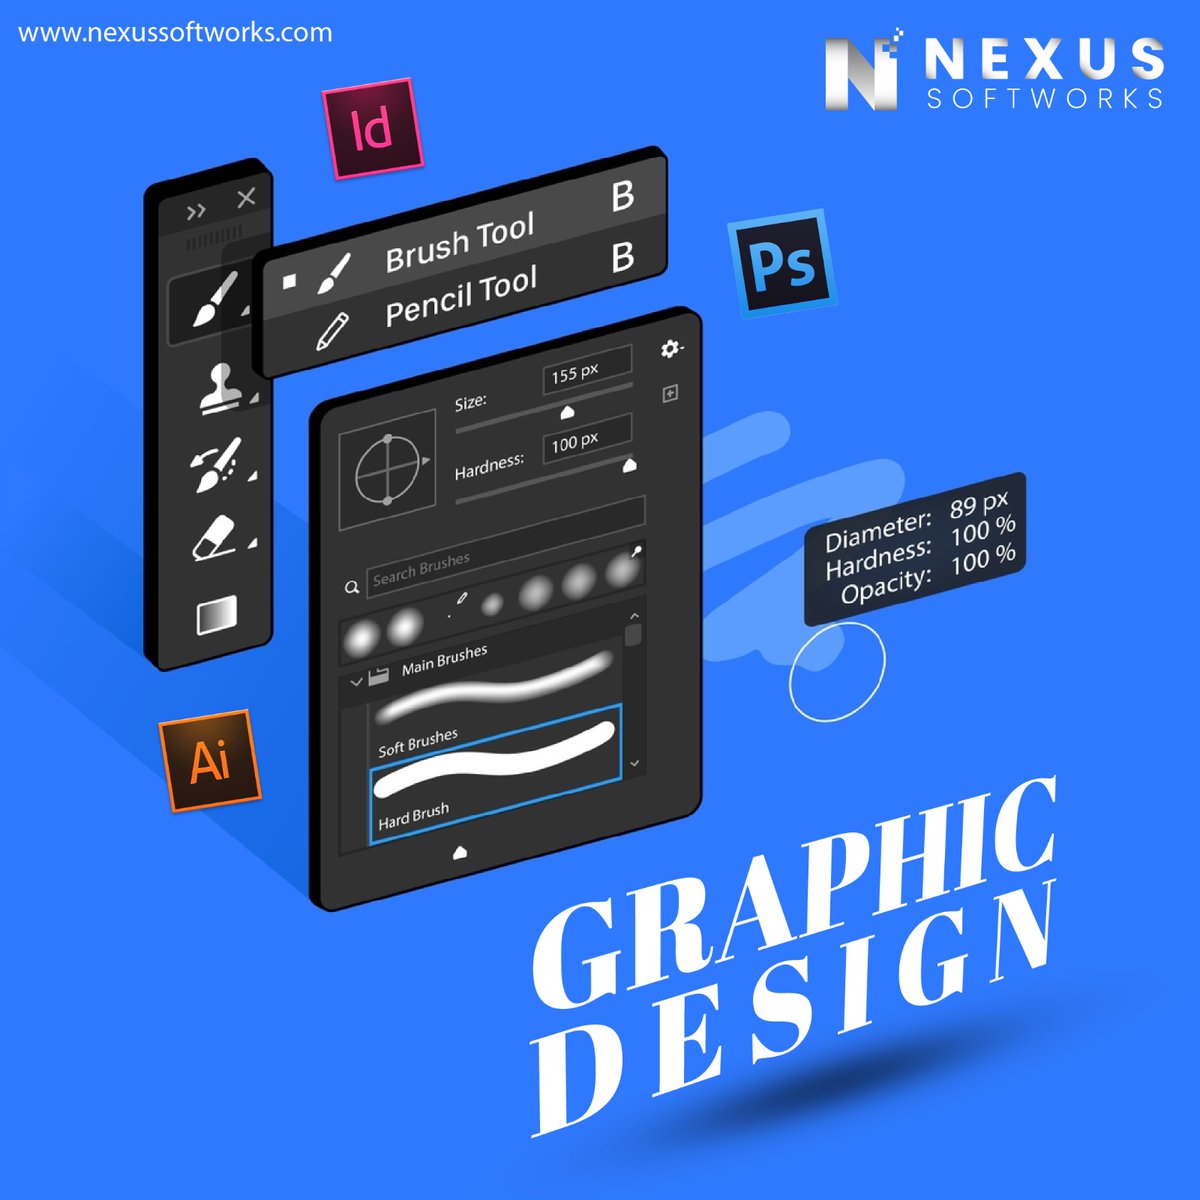 Graphic design entails creating visual content to effectively communicate ideas using colour, shape, text, and imagery in an educational and visually appealing manner. 
.
.
#nexussoftworks #designing #graphicdesigning #colour #creatingvisualcontent 🌈📝🎡🎨